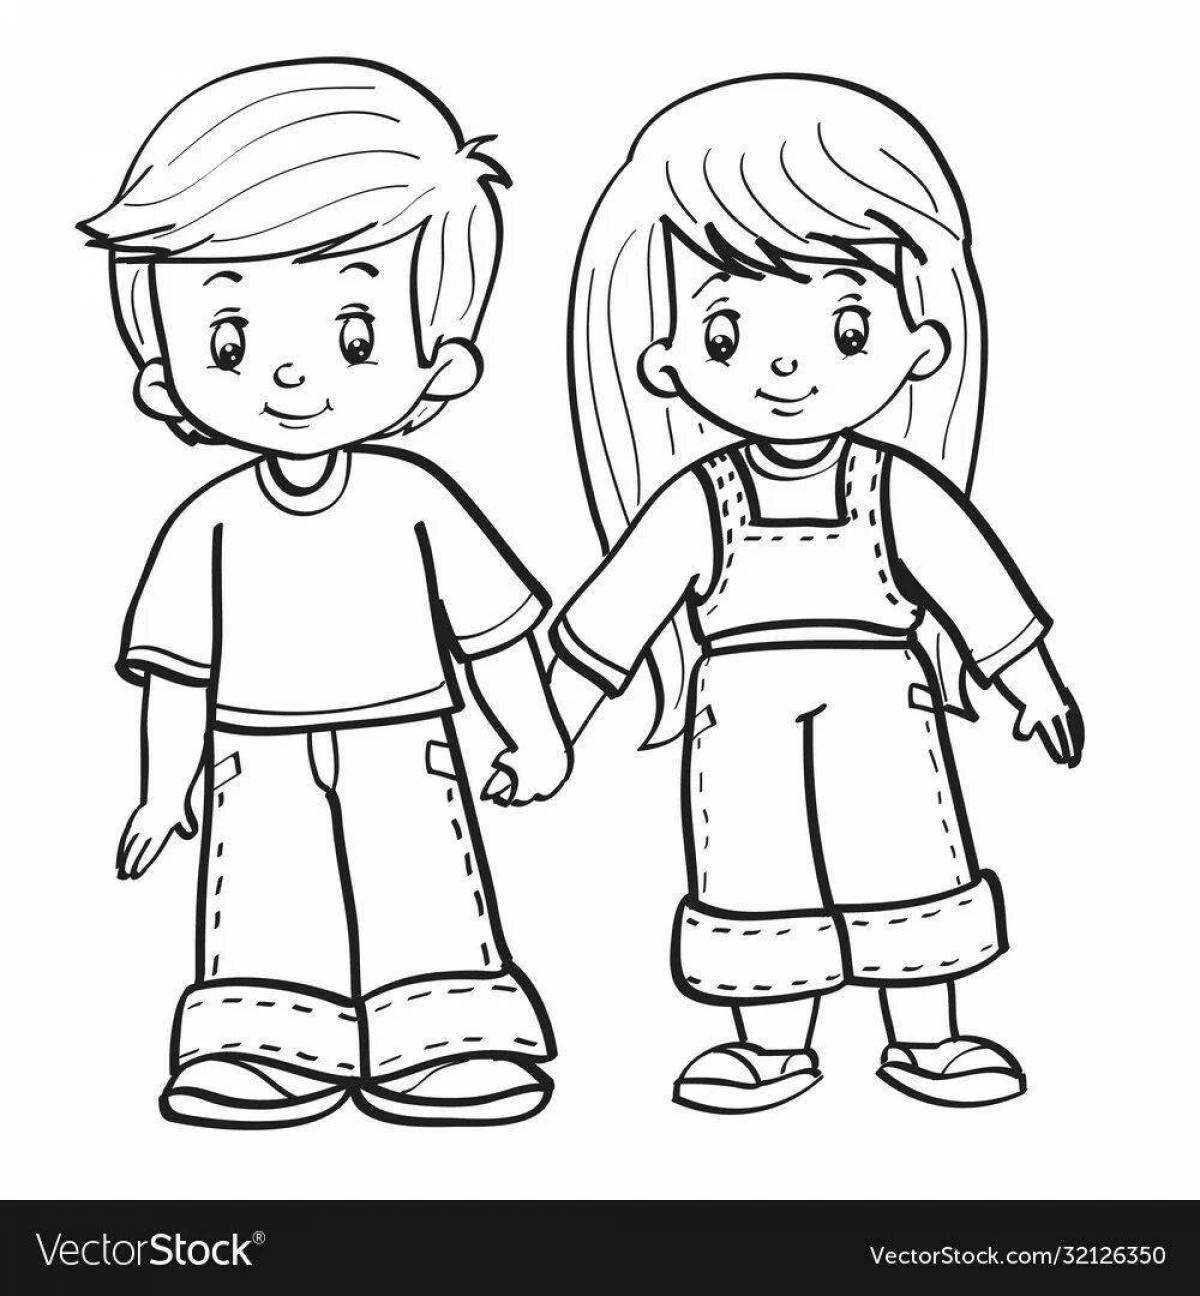 Joyful coloring pages for boys and girls